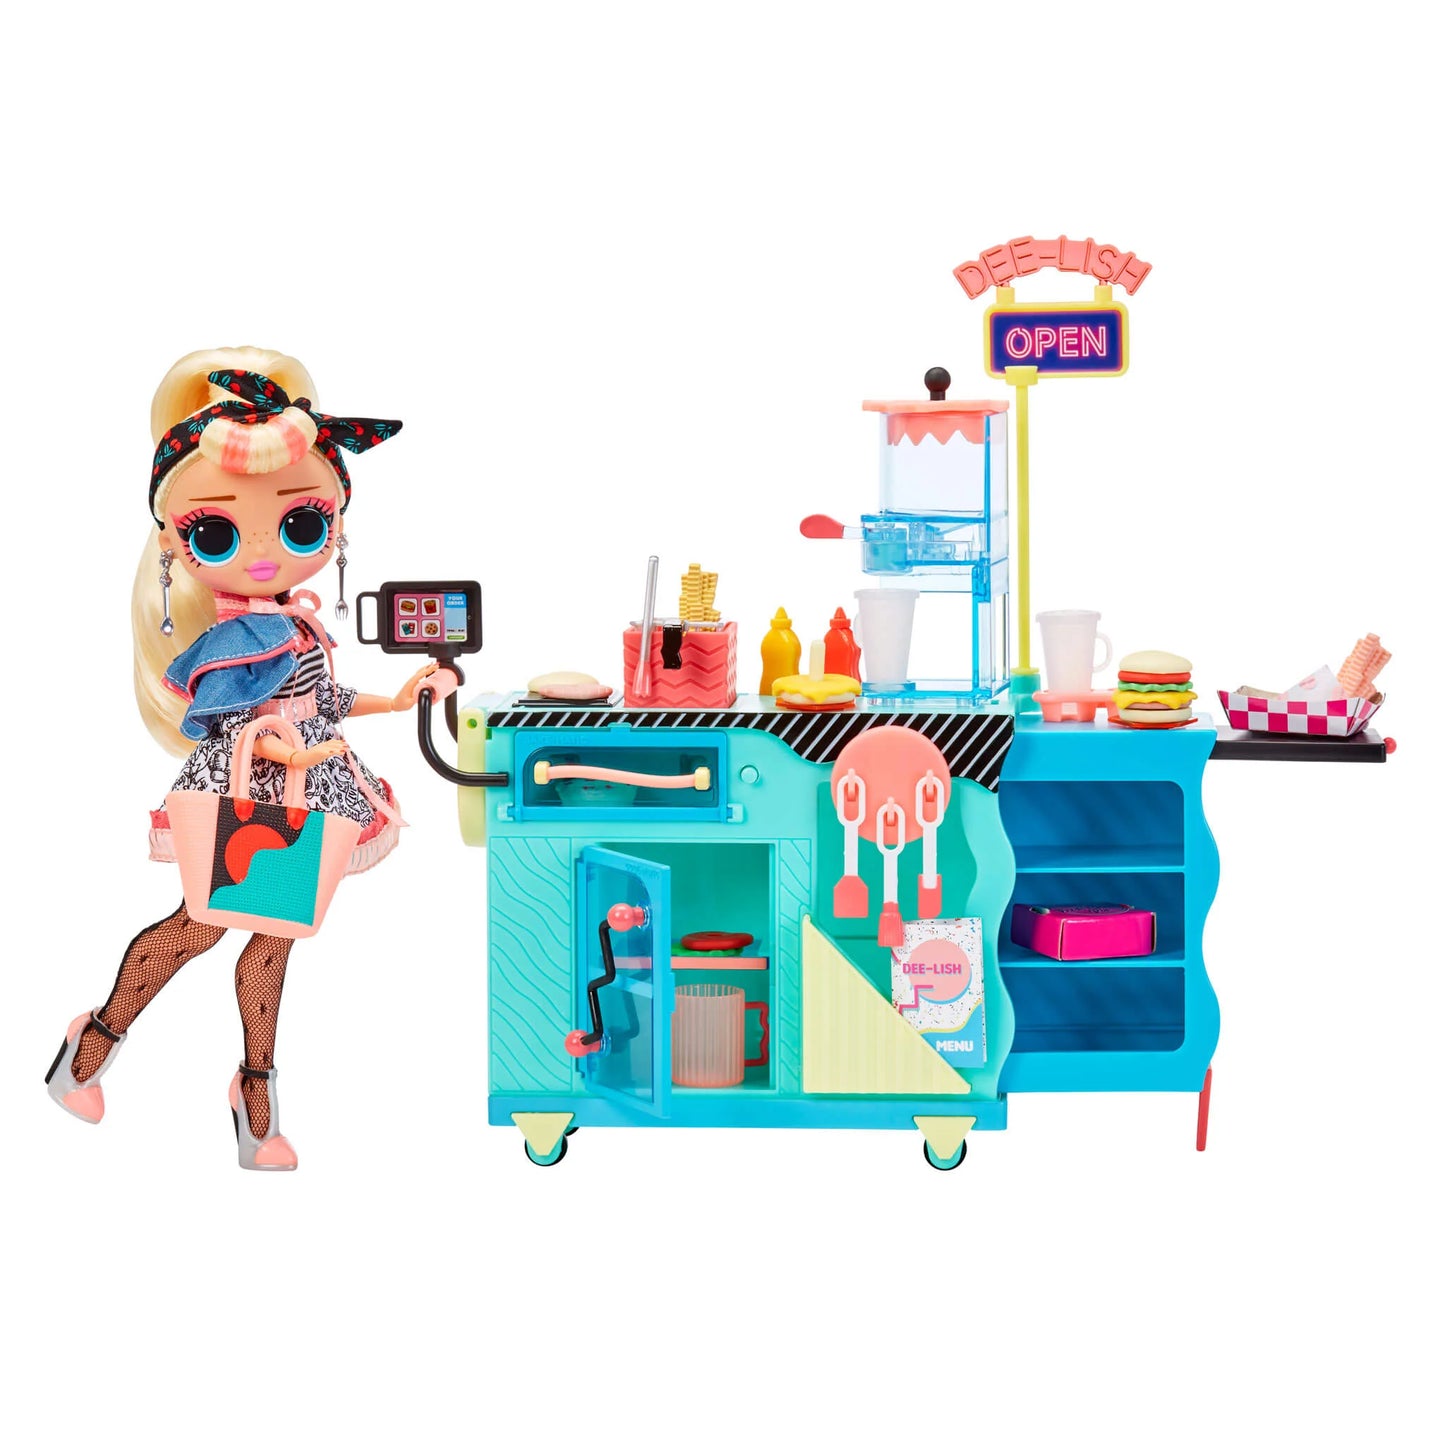 L.O.L. Surprise OMG To Go Diner Playset With 45+ Surprises and Exclusive Doll